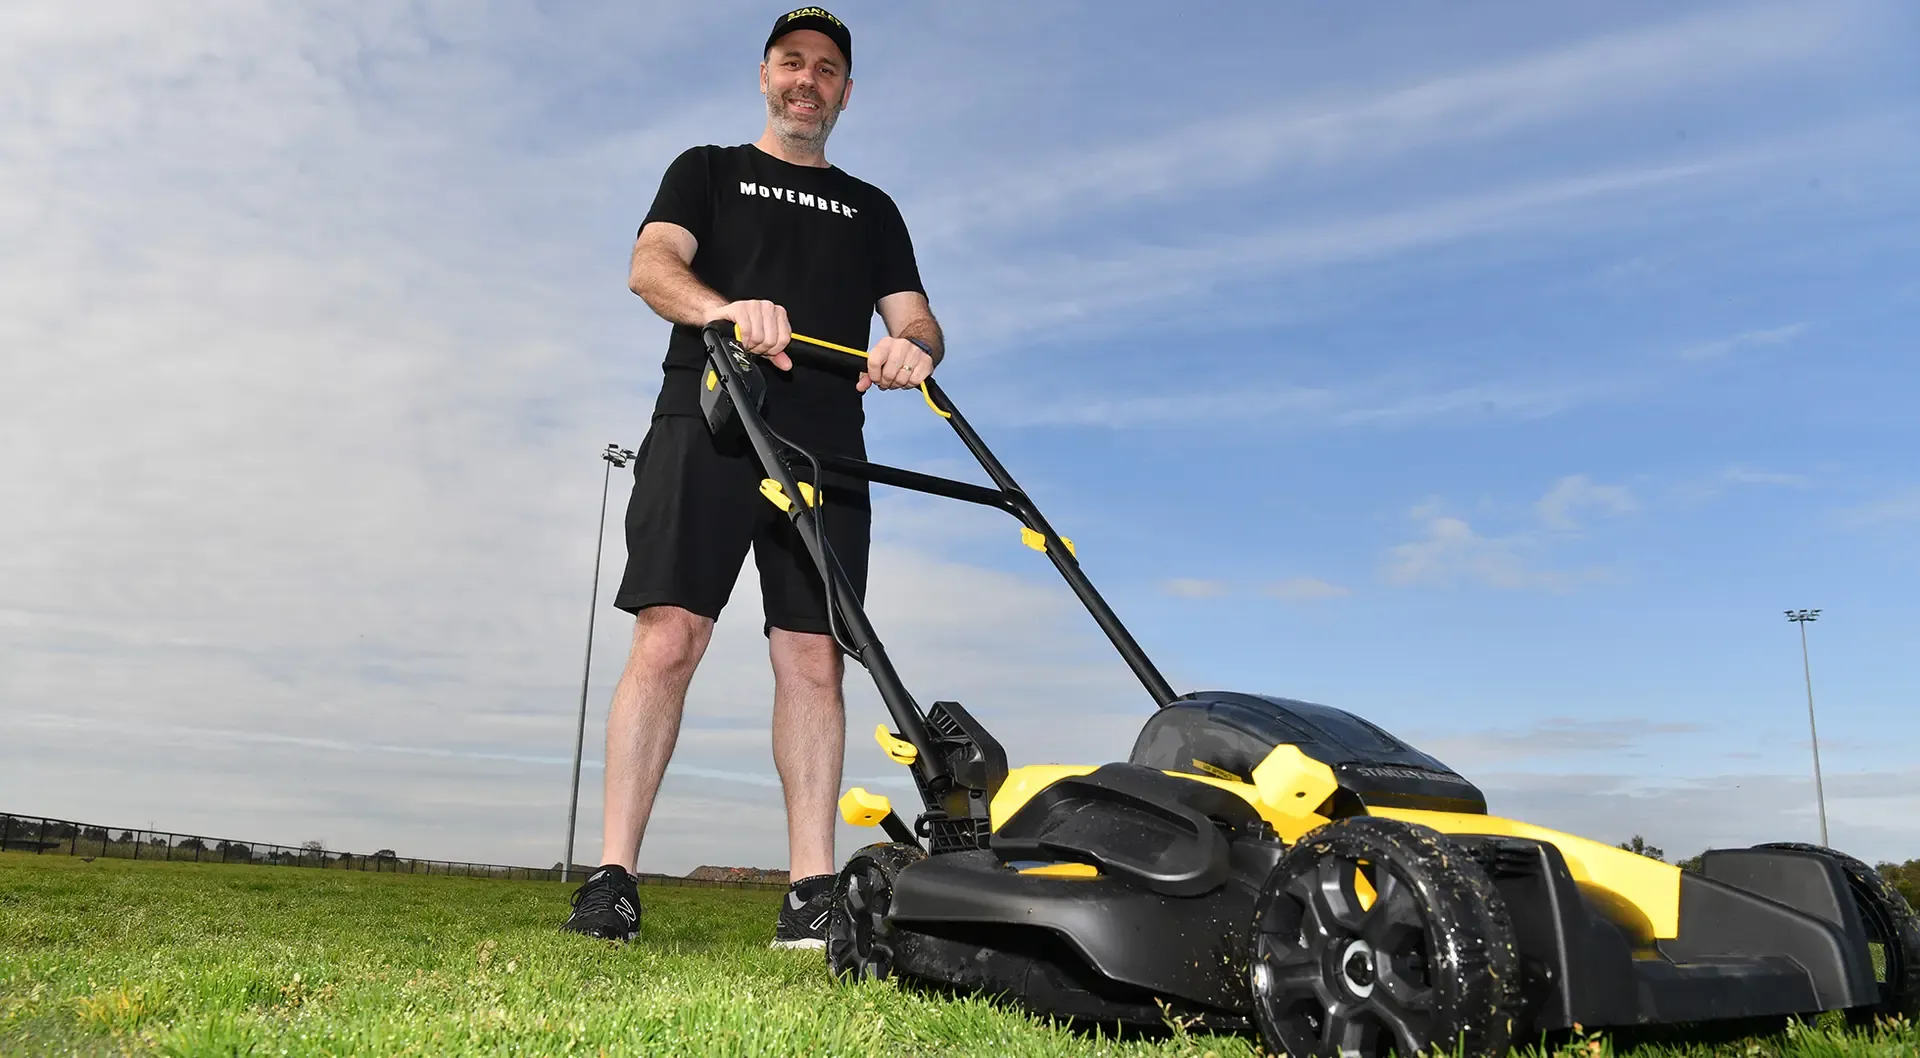 A man in Movember-branded attire, pushing a lawnmower.